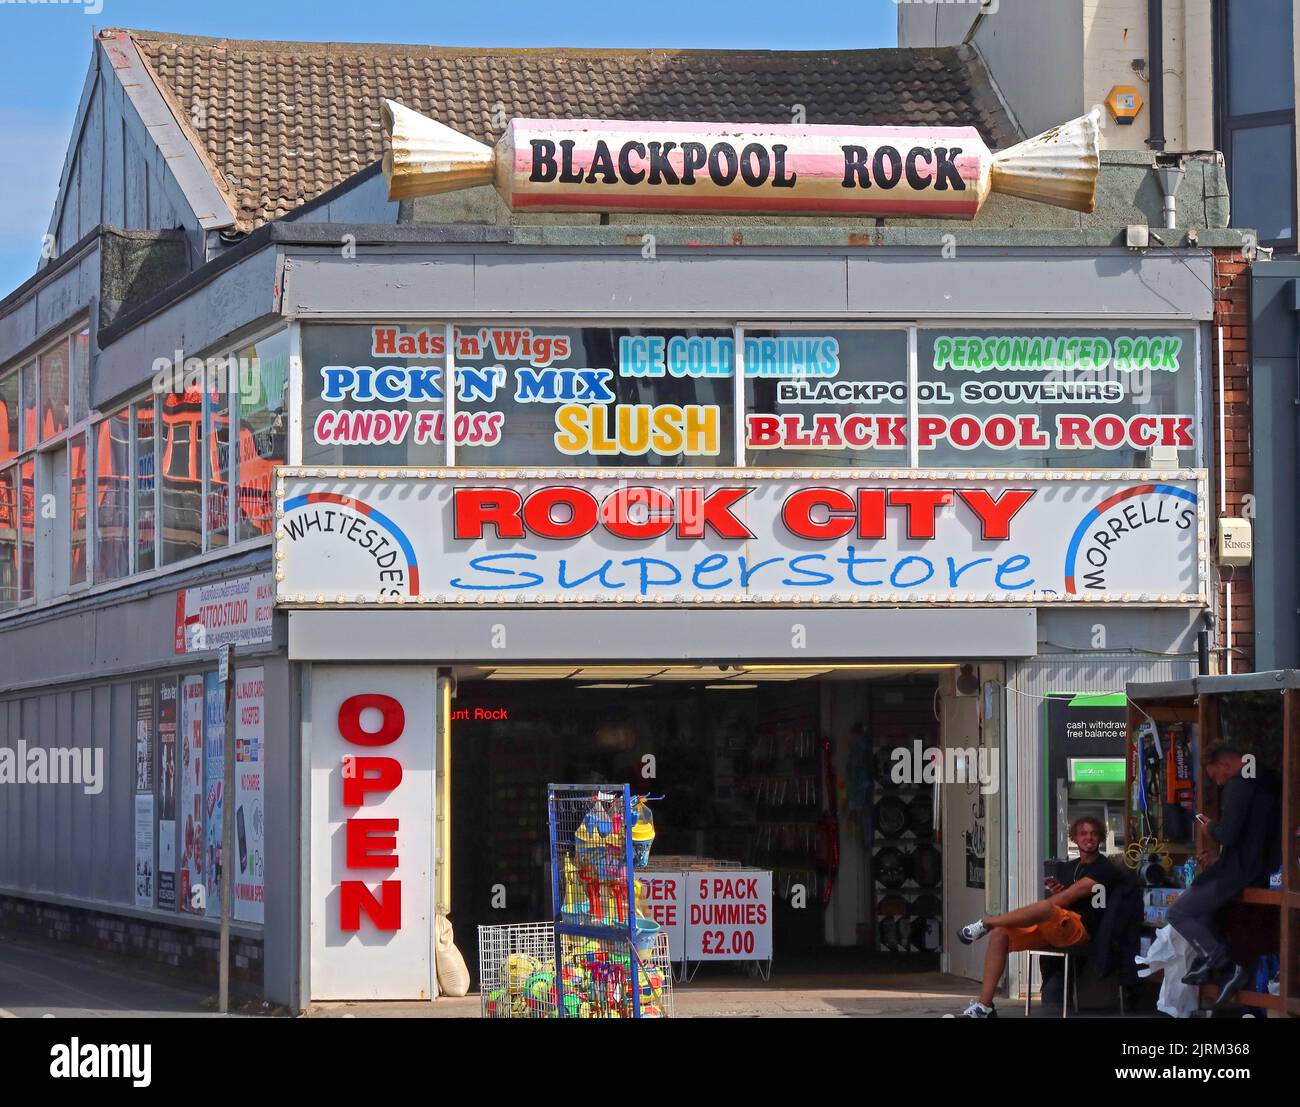 Whitesides Blackpool Rock City Superstore, Mint, Peardrop, Aniseed, Obst, Fizzy Cola, Lancashire, England, Großbritannien, FY1 Stockfoto